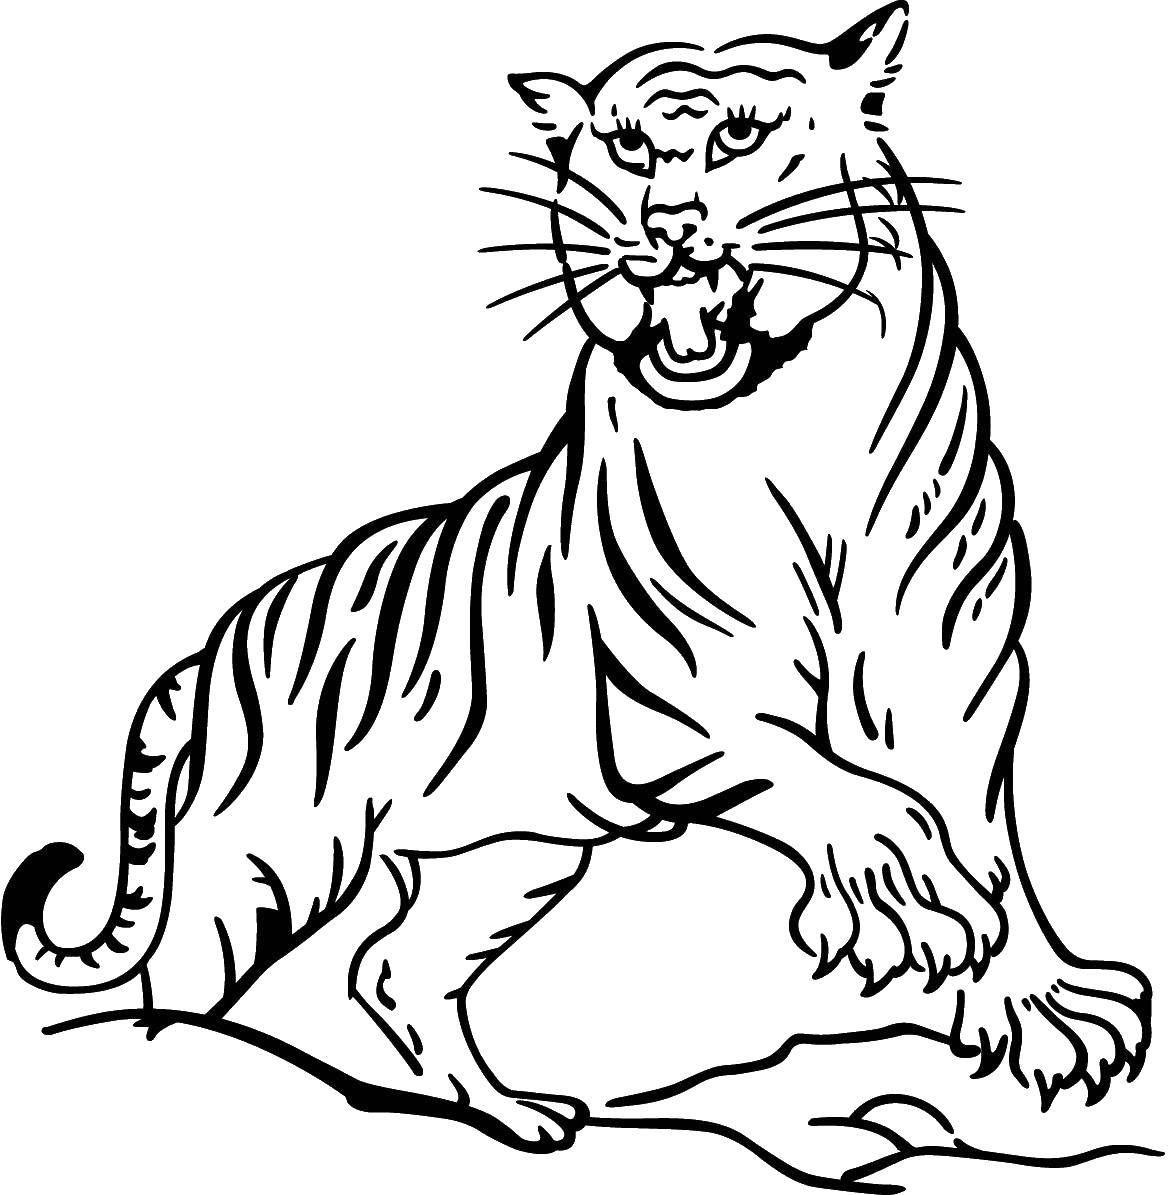 Coloring Tiger. Category Animals. Tags:  the tiger.